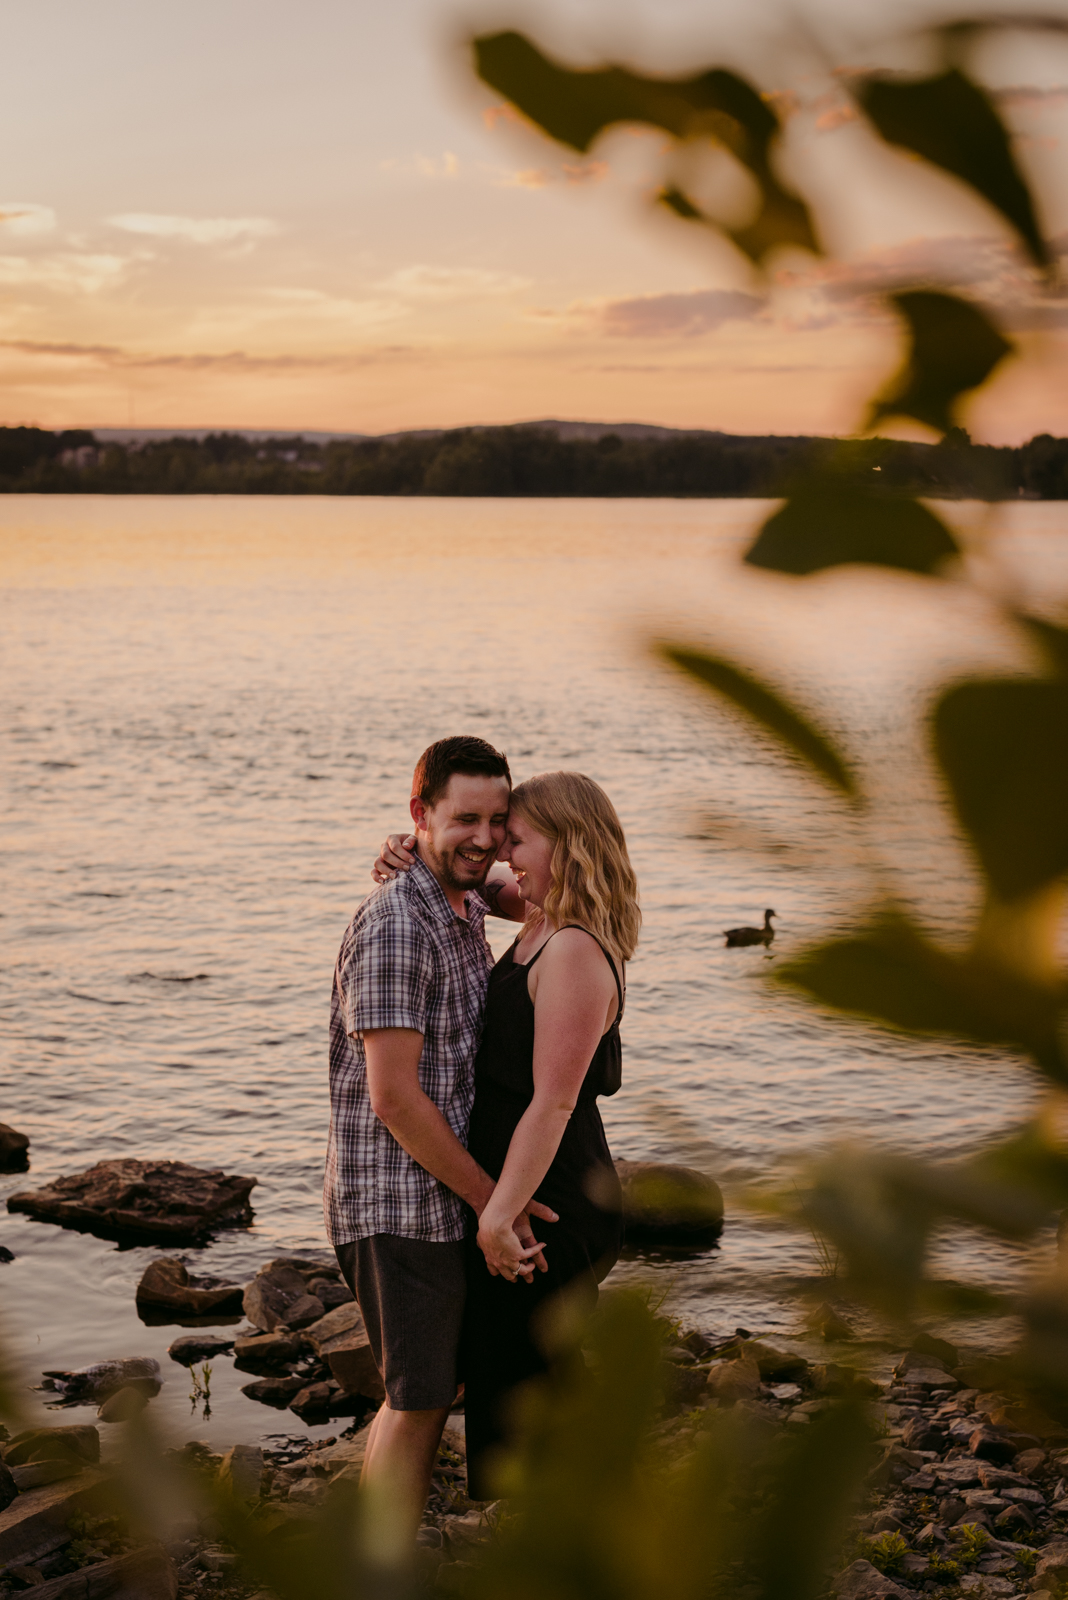 engaged couple cuddling and laughing by the water at sunset